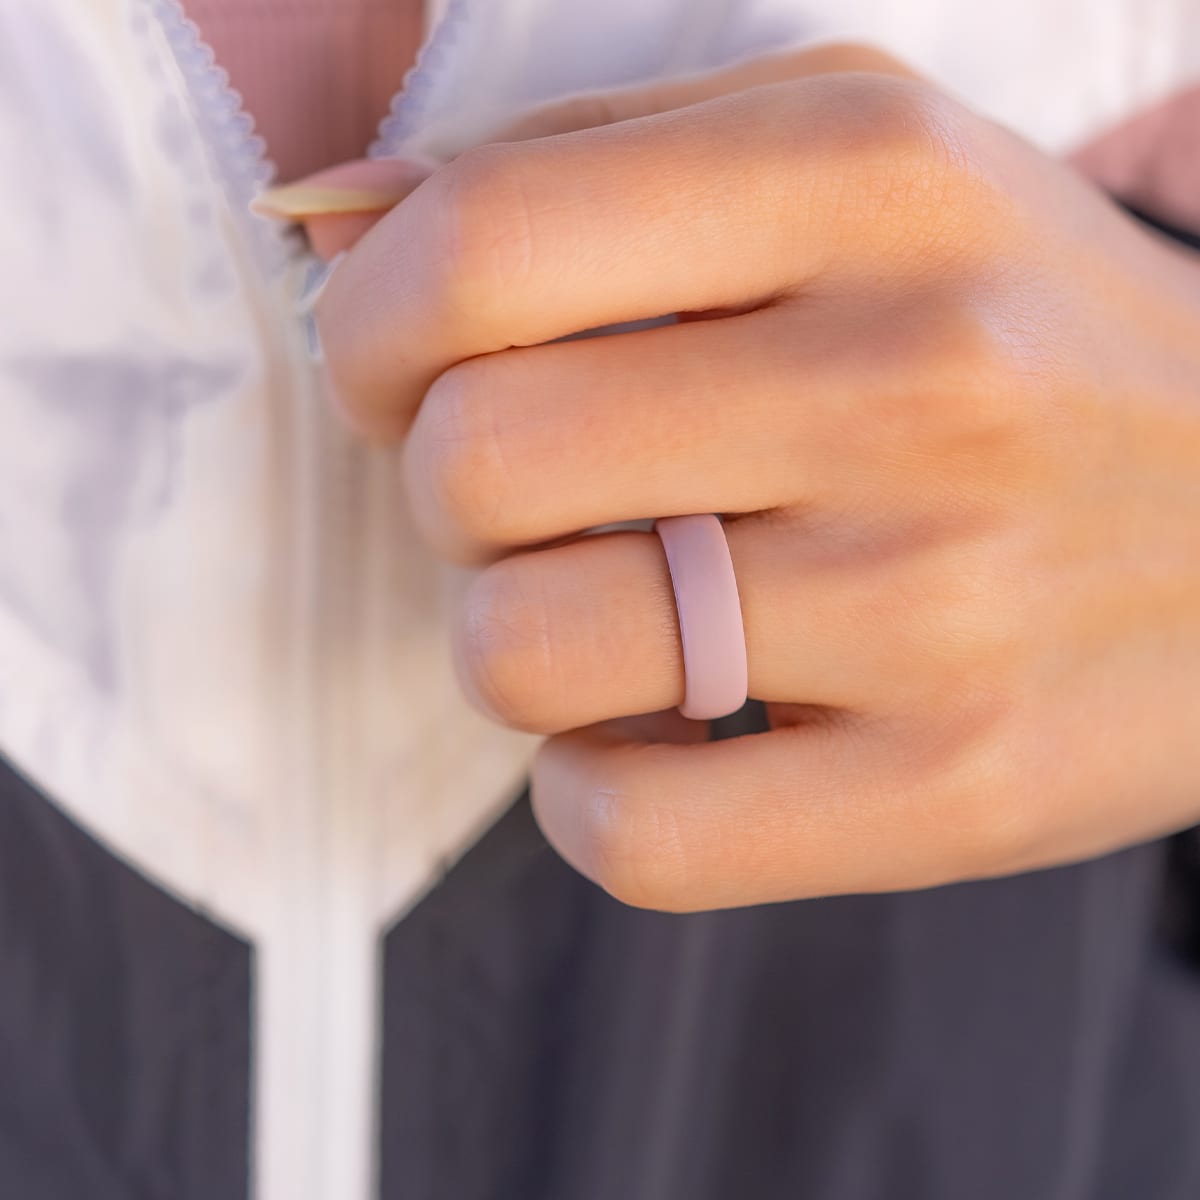 Flexible and versatile rubber wedding band worn by a woman